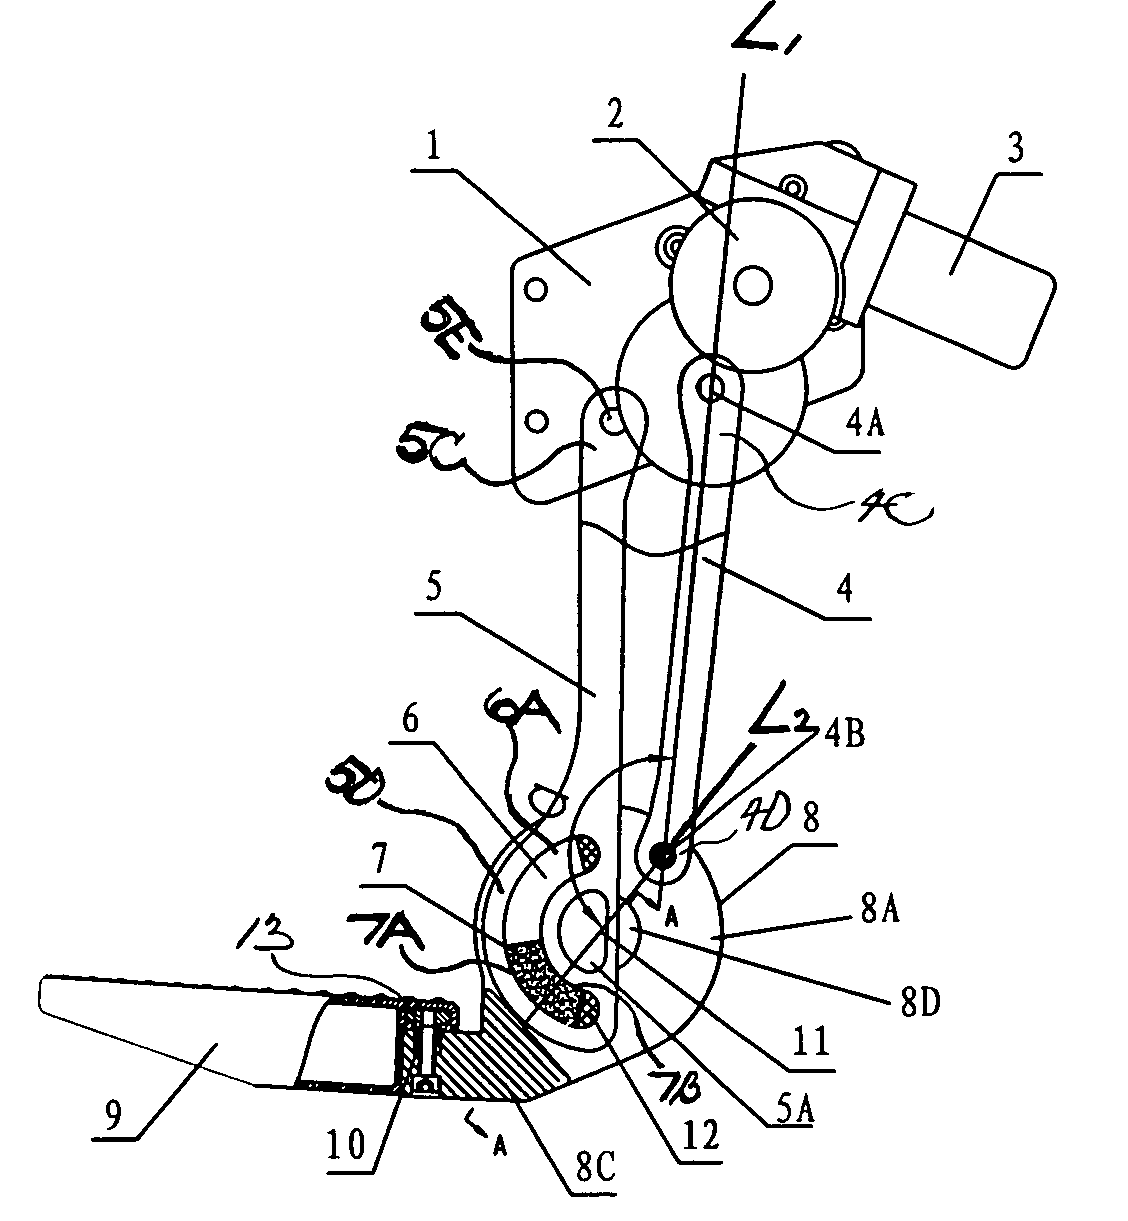 Extending and retracting device for vehicle step